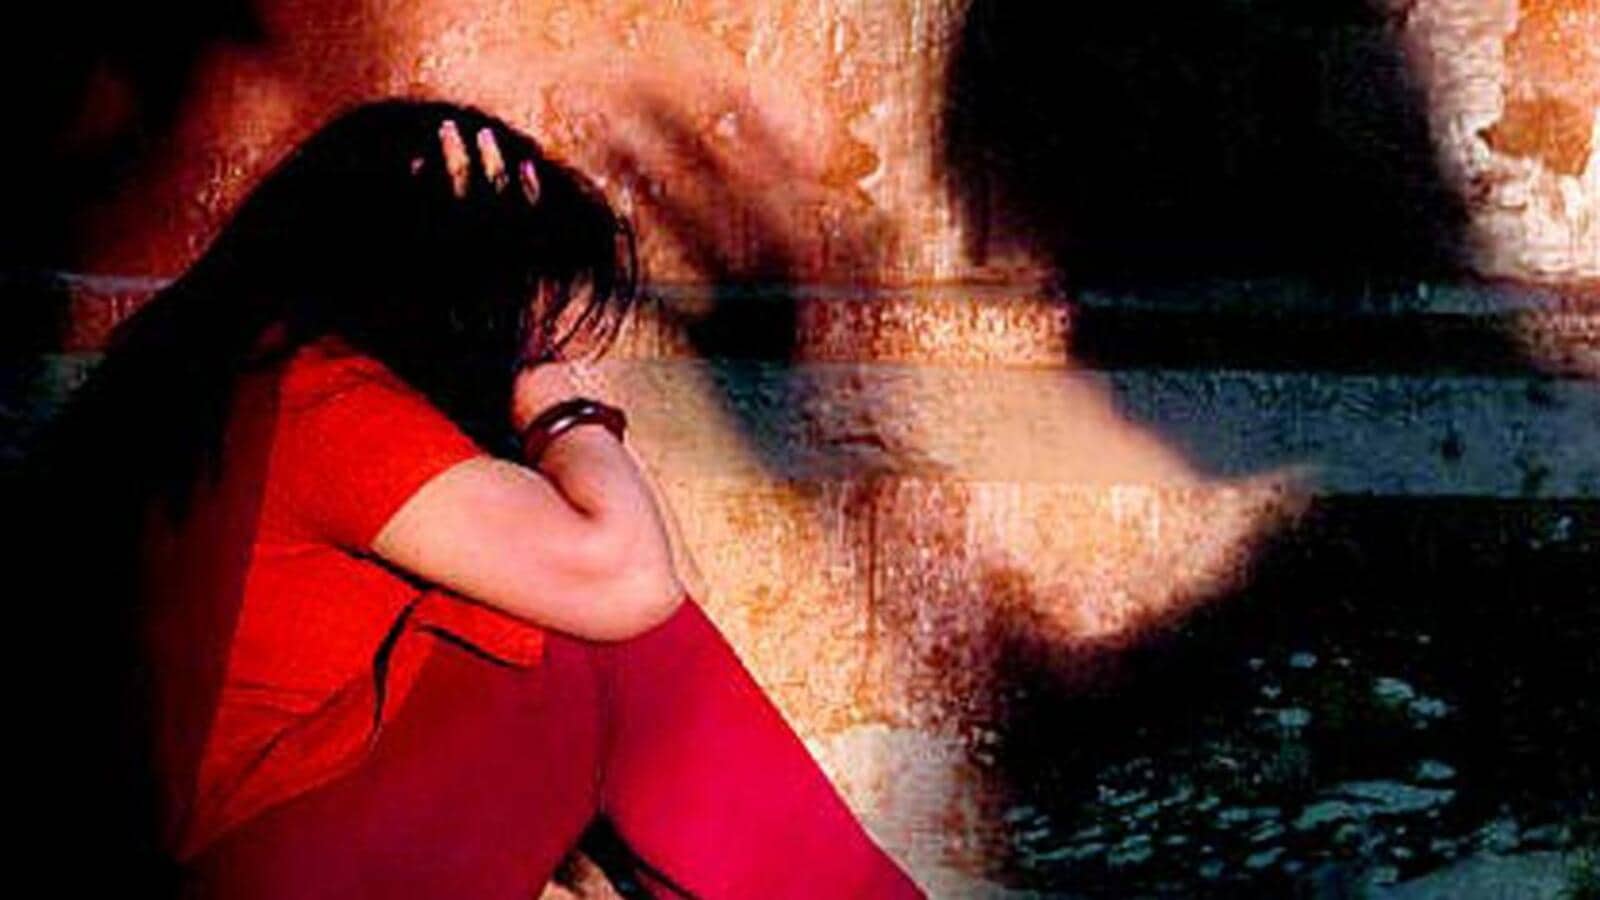 Kerala: Models’ death accused hotel owner booked in Pocso case | Latest News India